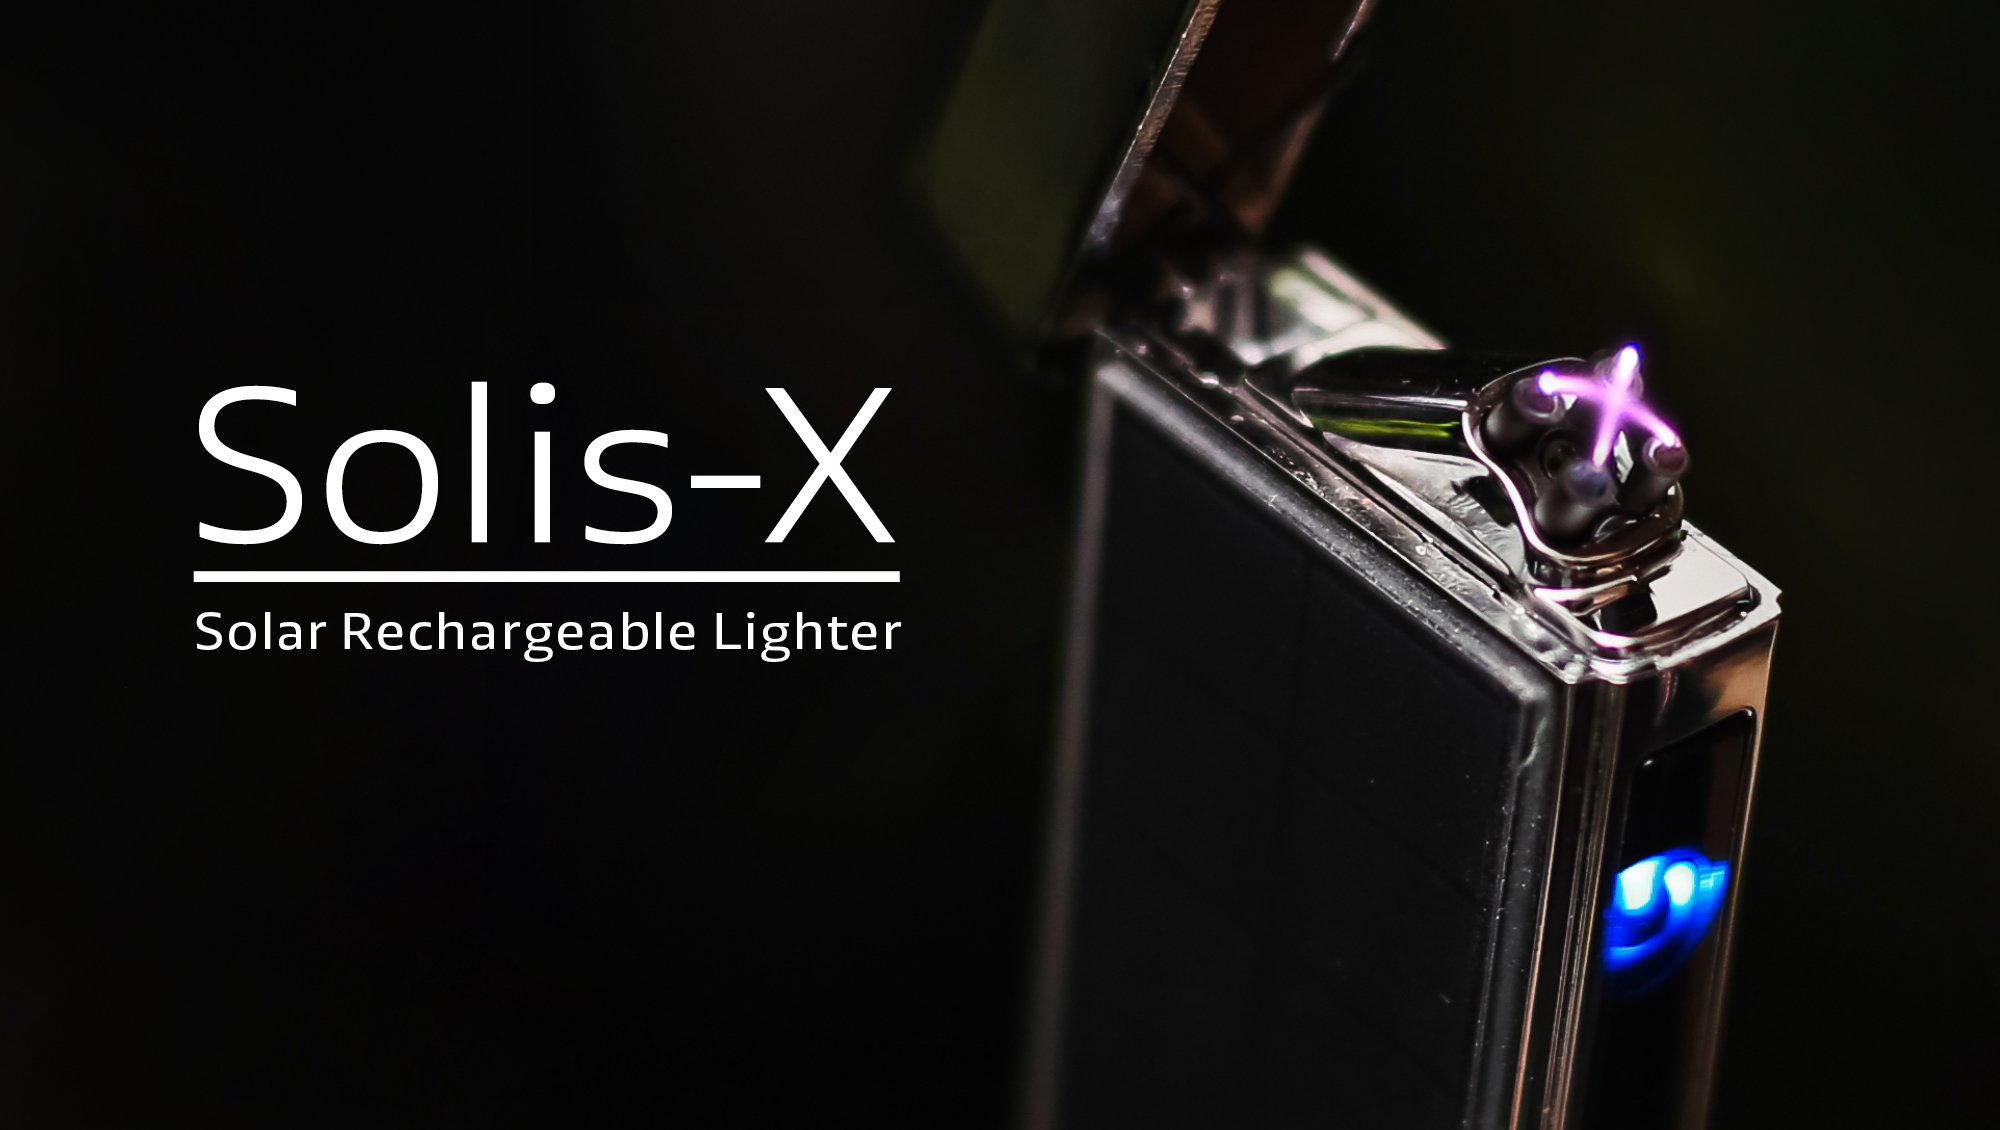 Green Energy Gadgets LLC Launches the Revolutionary Solis-X Solar Rechargeable on Indiegogo